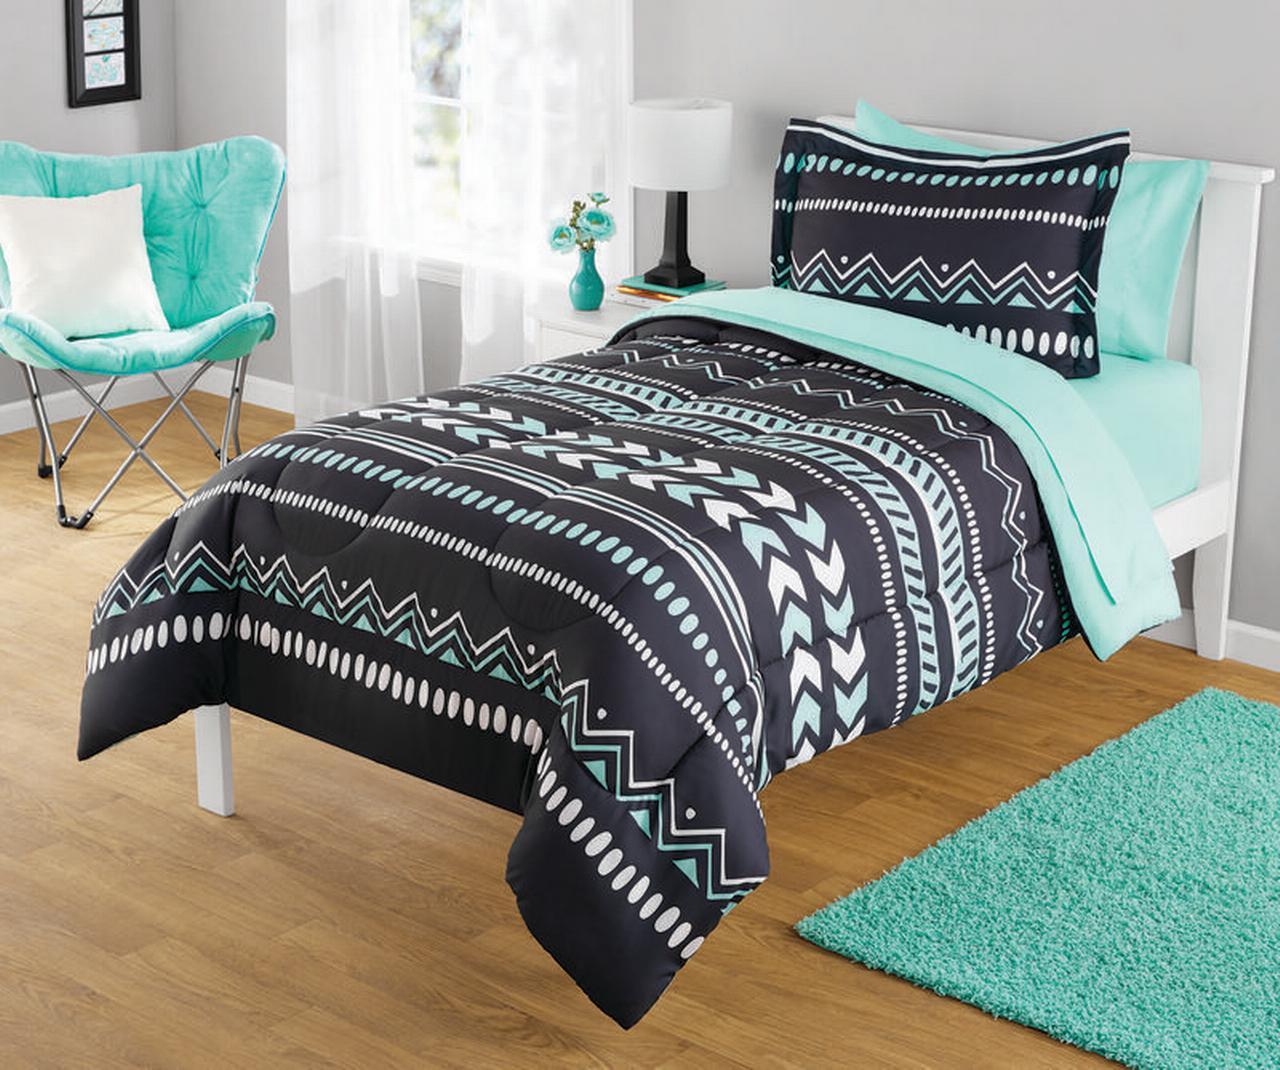 Your Zone Mint Gray Tribal 2 Piece Comforter and Sham Set Twin/XL - image 1 of 5